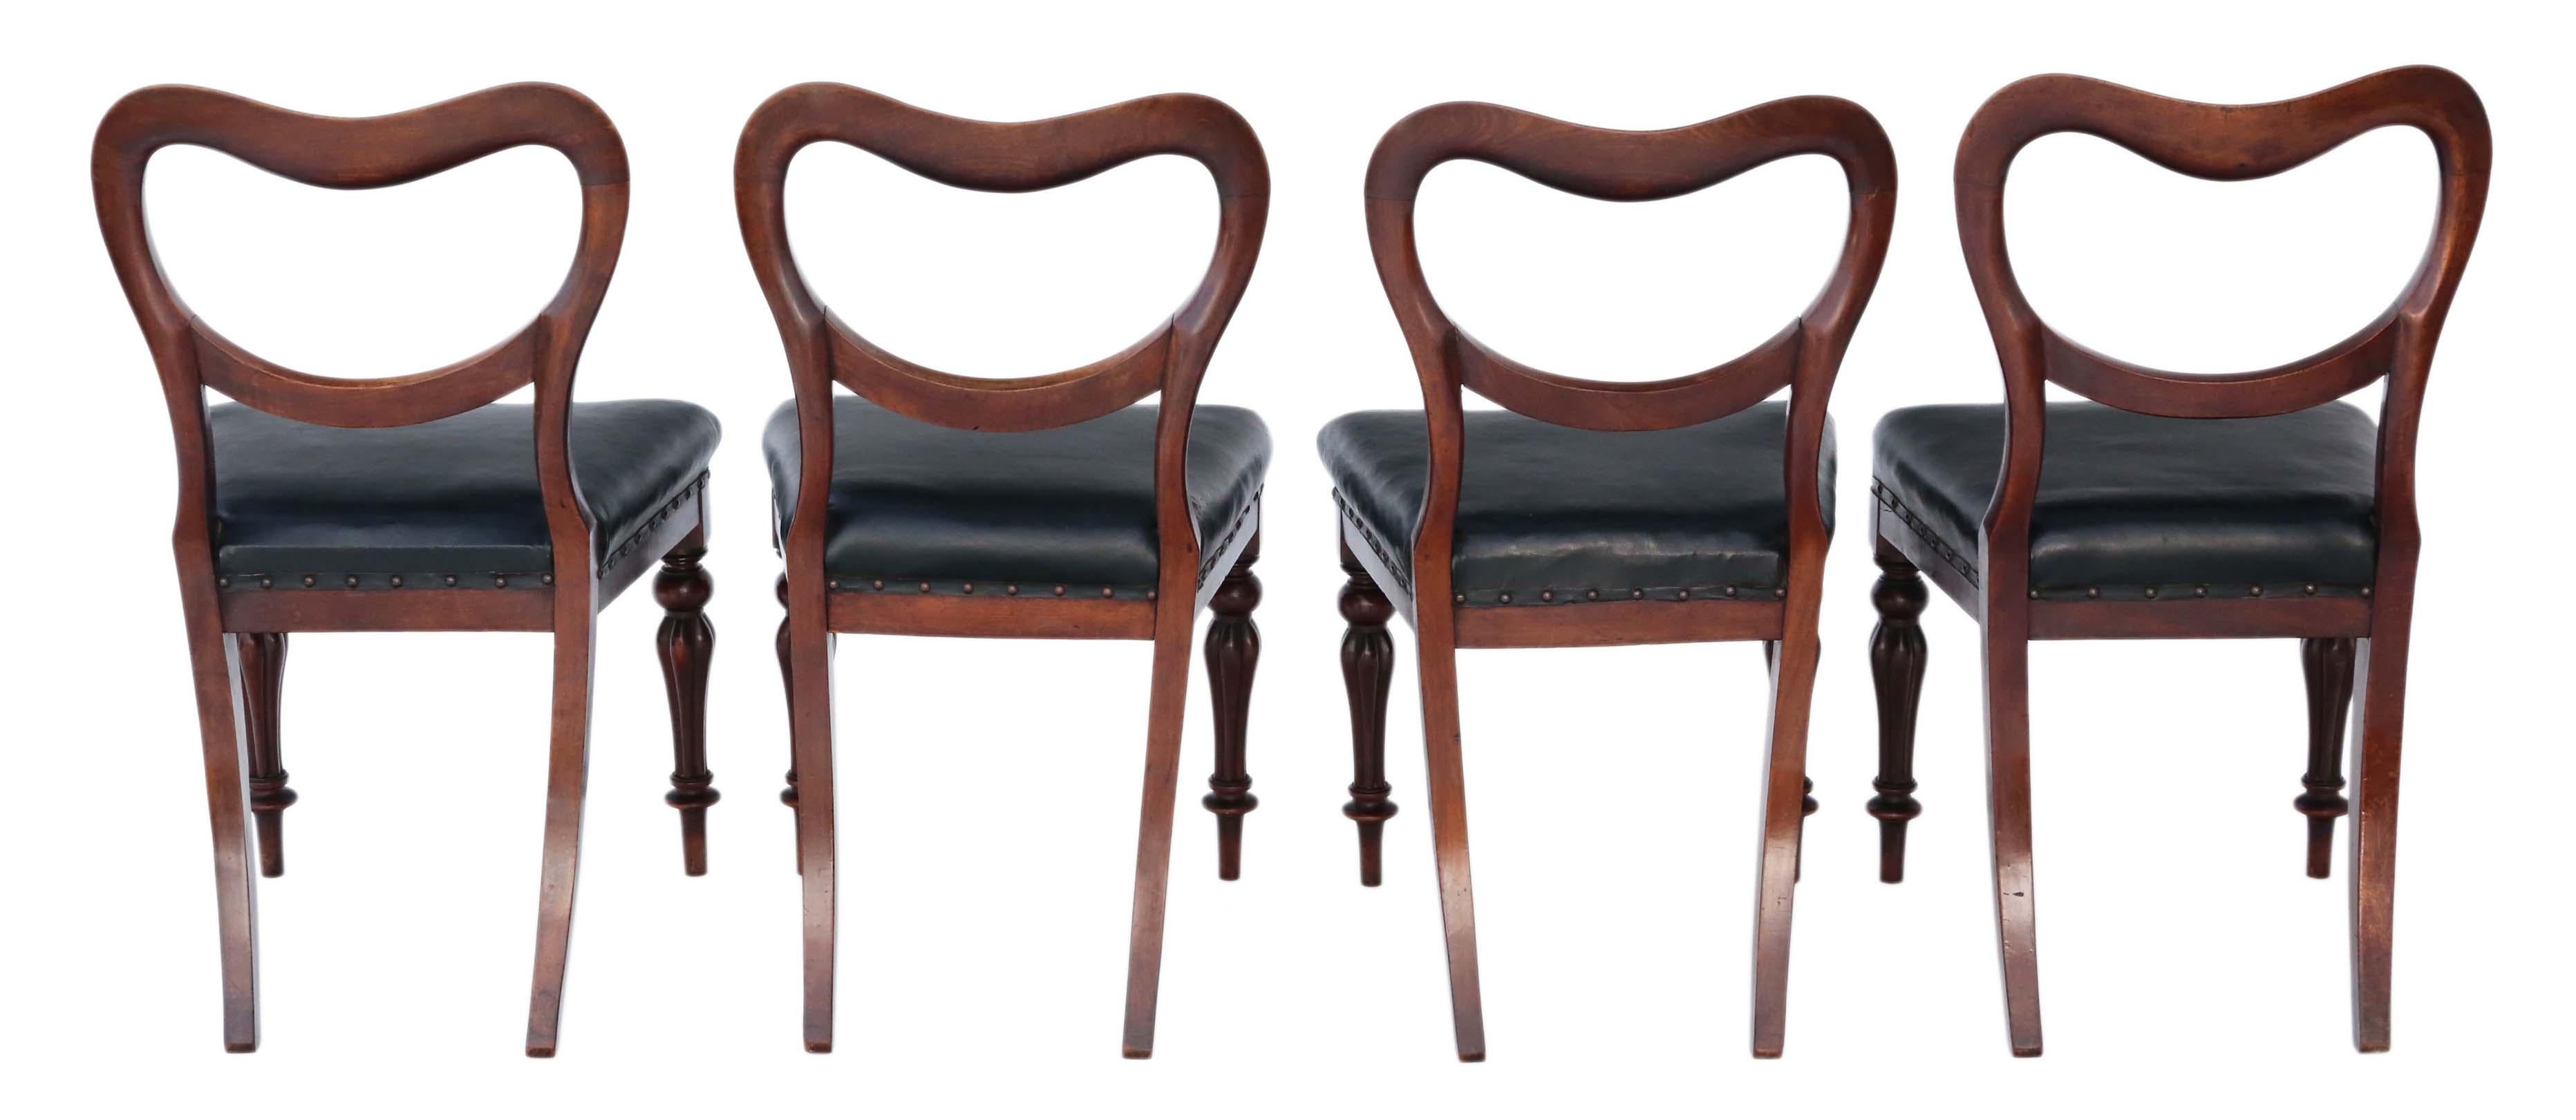 Antique quality set of 4 William IV \ Victorian mahogany cloud balloon back dining chairs, circa 1835-1850.
A very rare find with attractive mellon fluted legs.
Solid, heavy and strong with no loose joints.
Patinated dark green leather